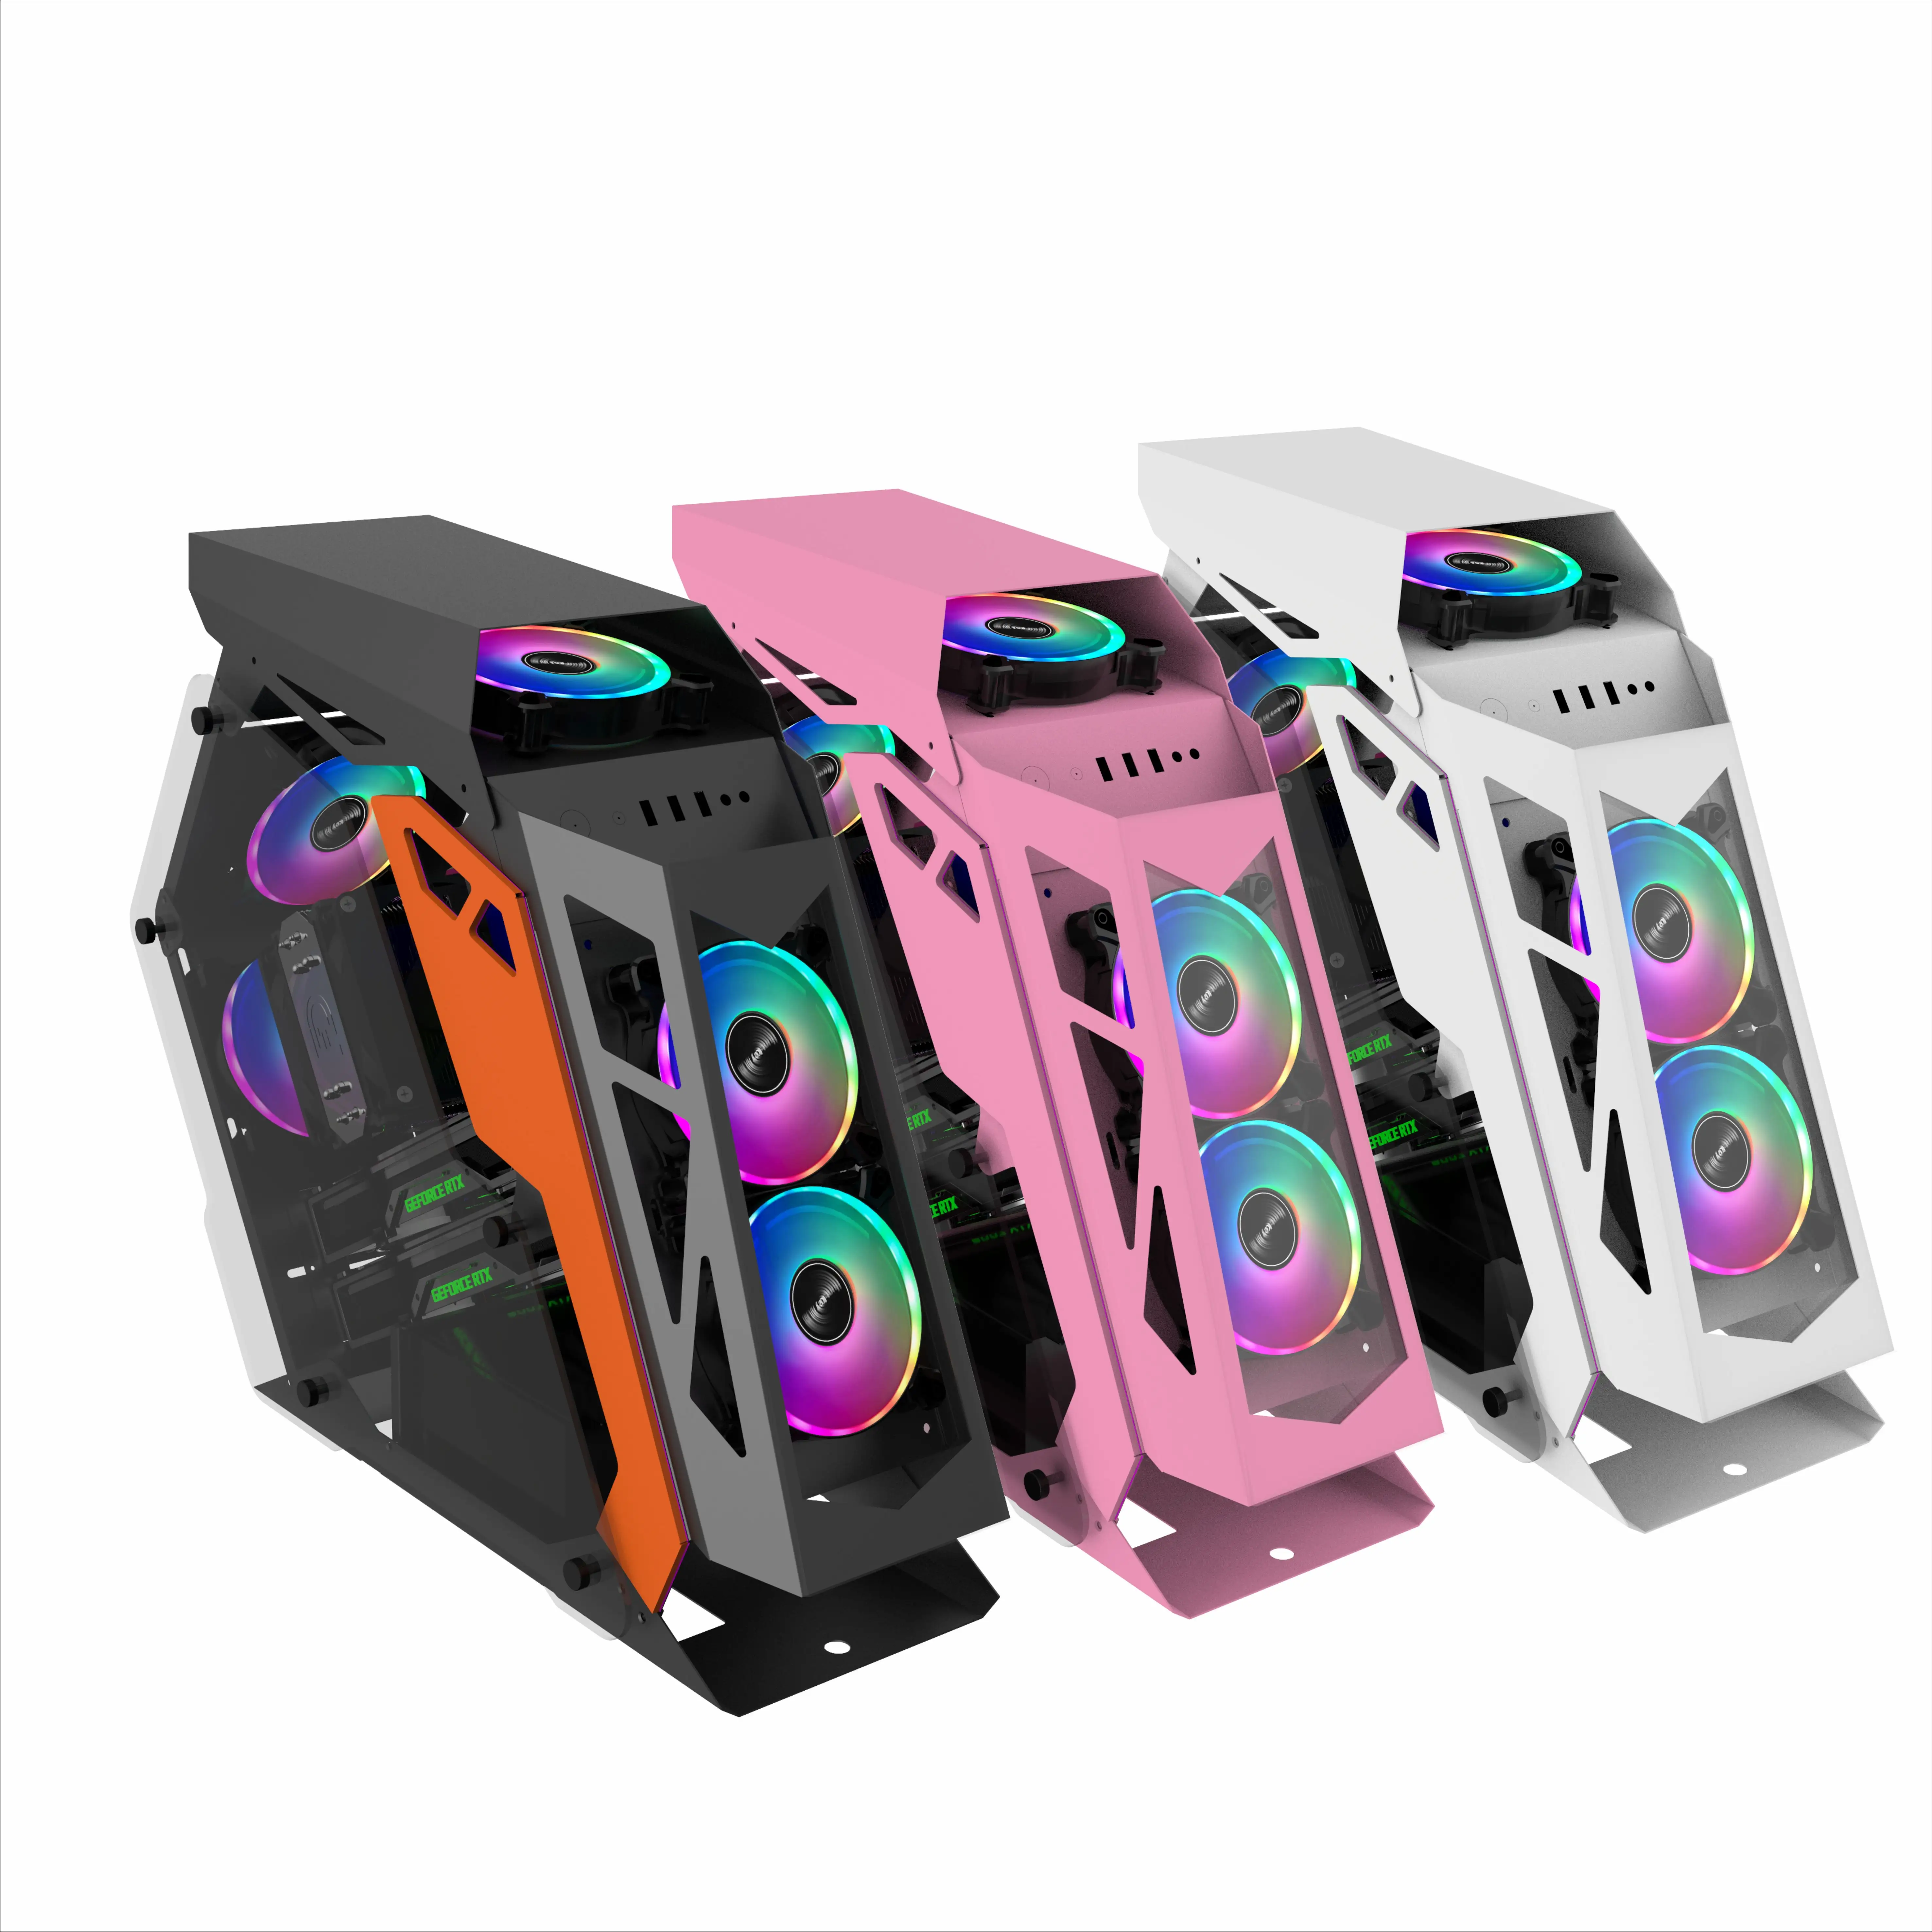 Most Popular High Quality Gaming PC Desktop Computer Gaming ITX Case ATX Computer Case & Towers CPU Cabinet